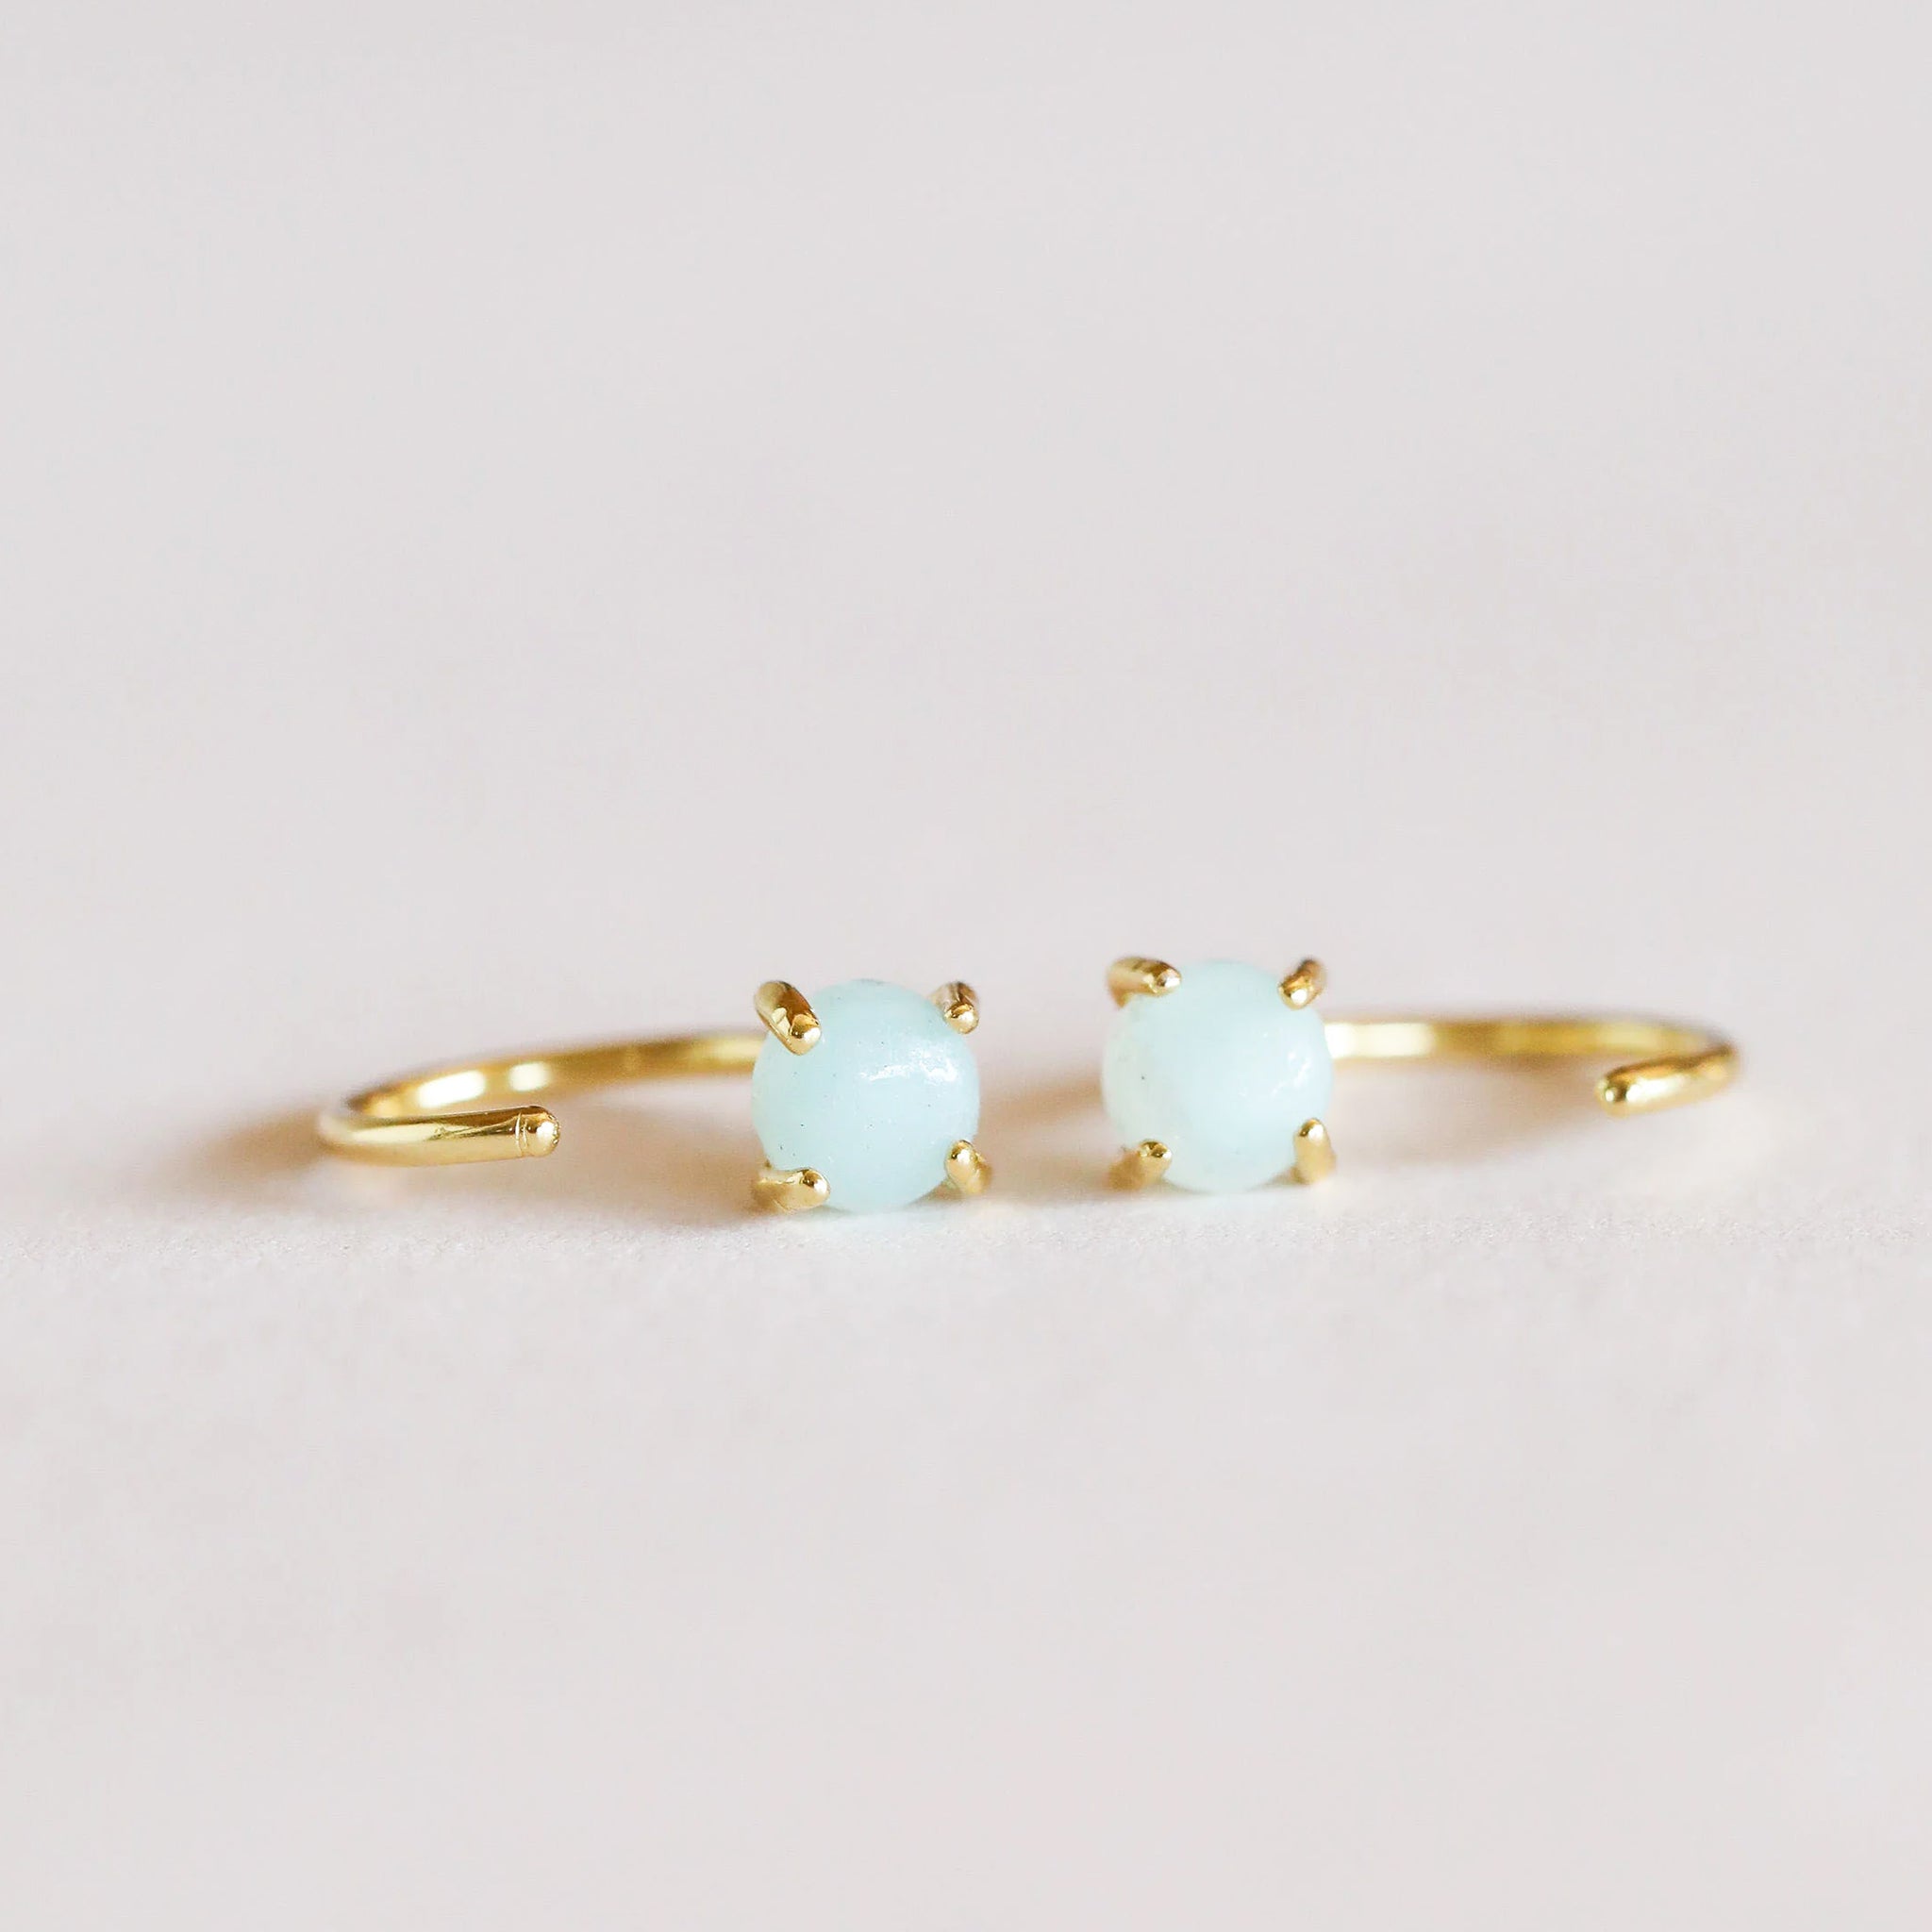 Gold huggie style earrings with set aqua colored amazonite gem.